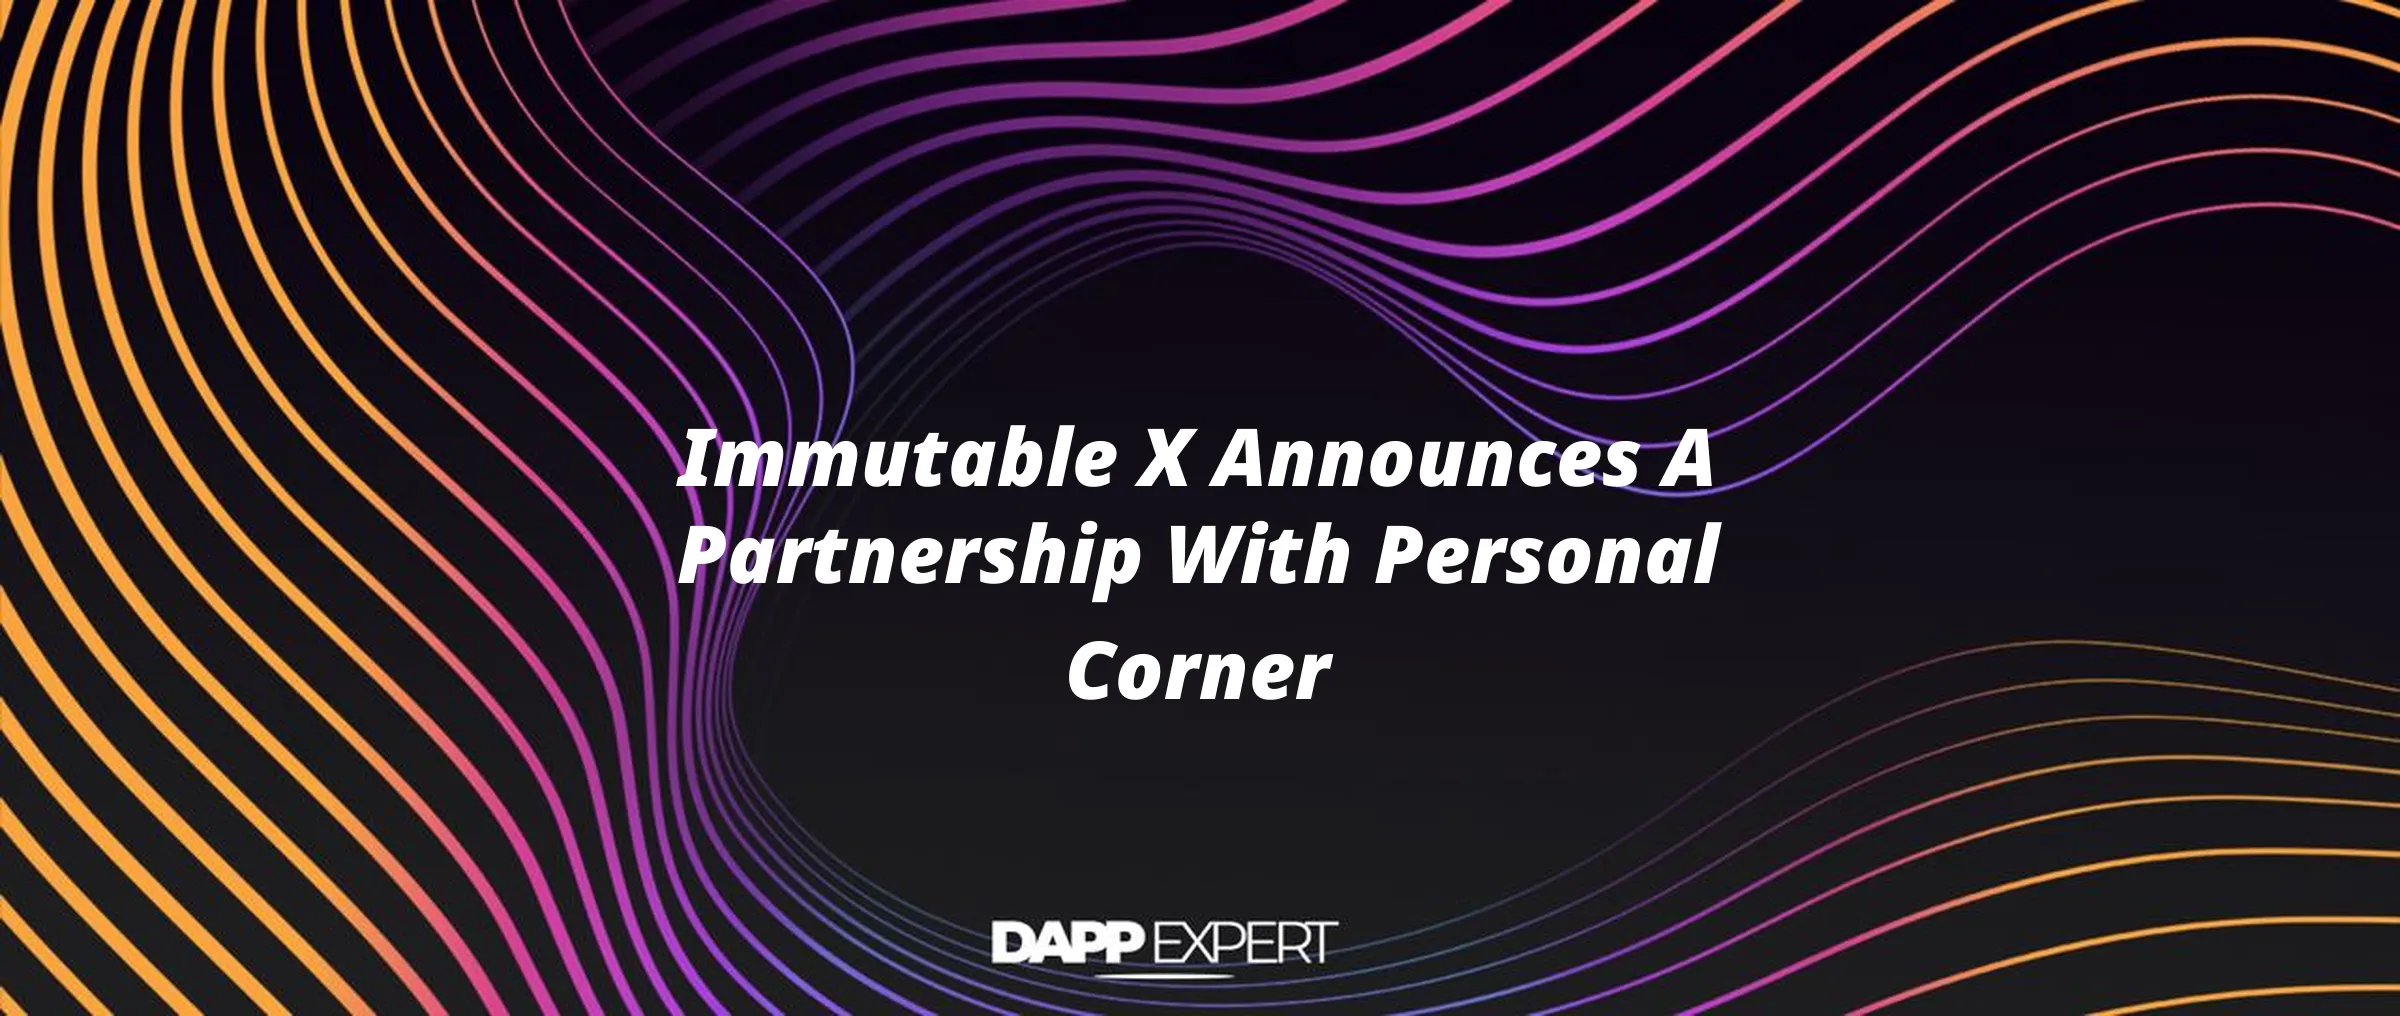 Immutable X Announces A Partnership With Personal Corner